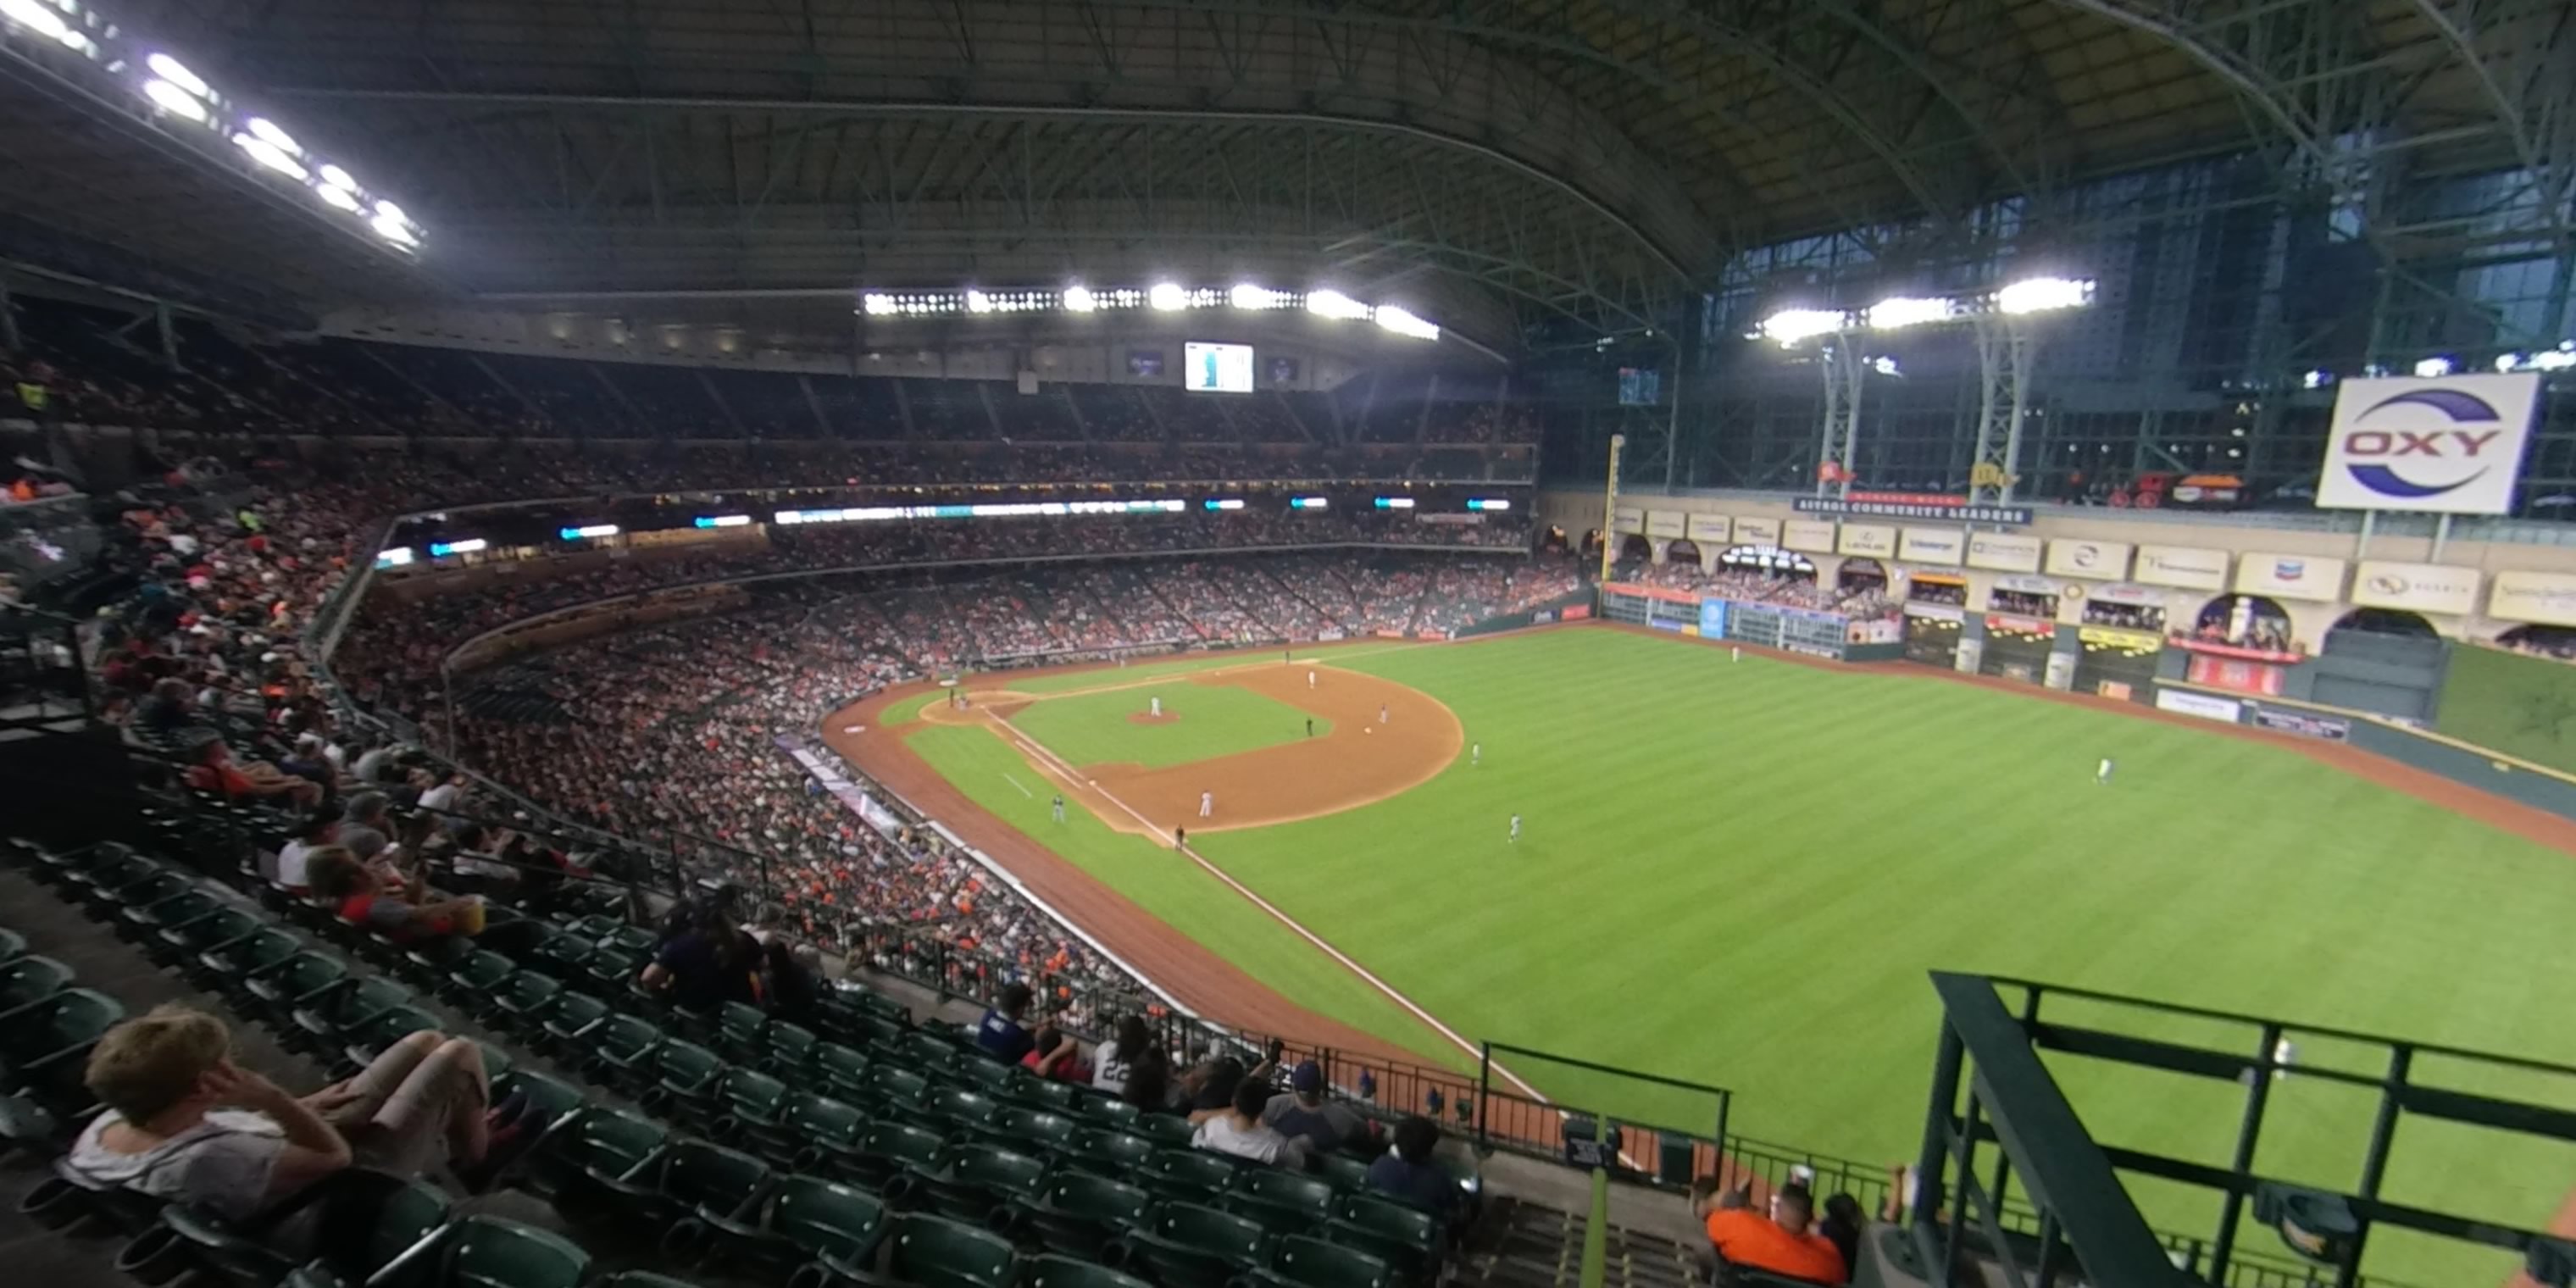 section 332 panoramic seat view  for baseball - minute maid park